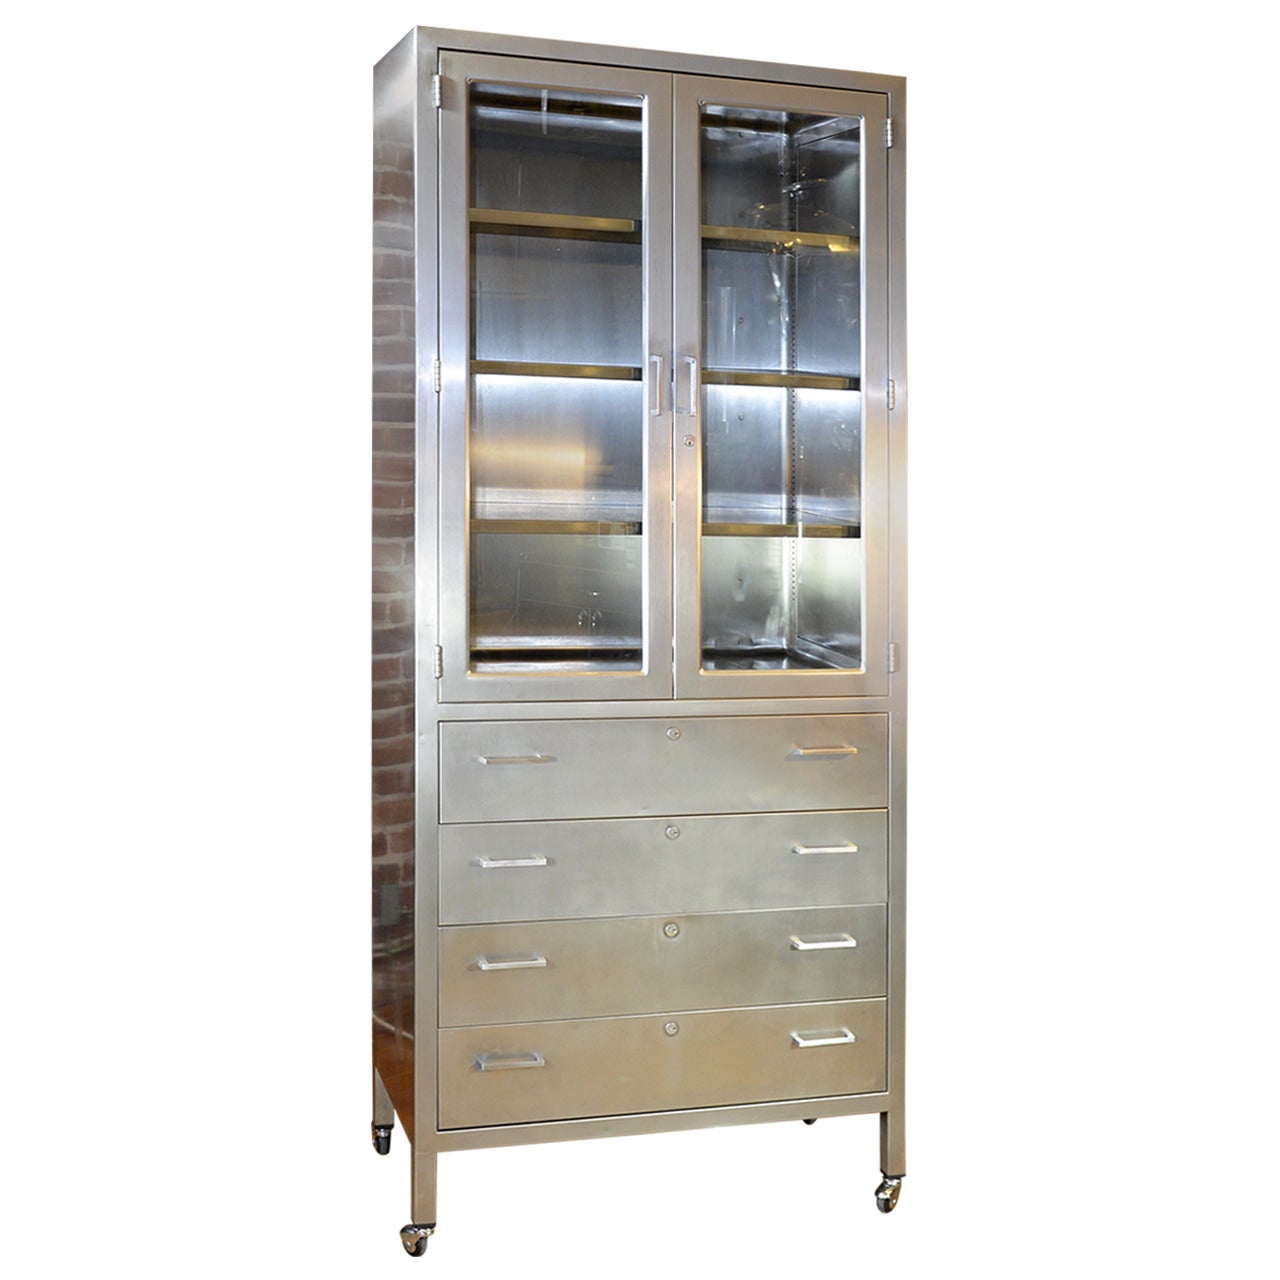 Classic Stainless Steel Lockdown Cabinet For Sale